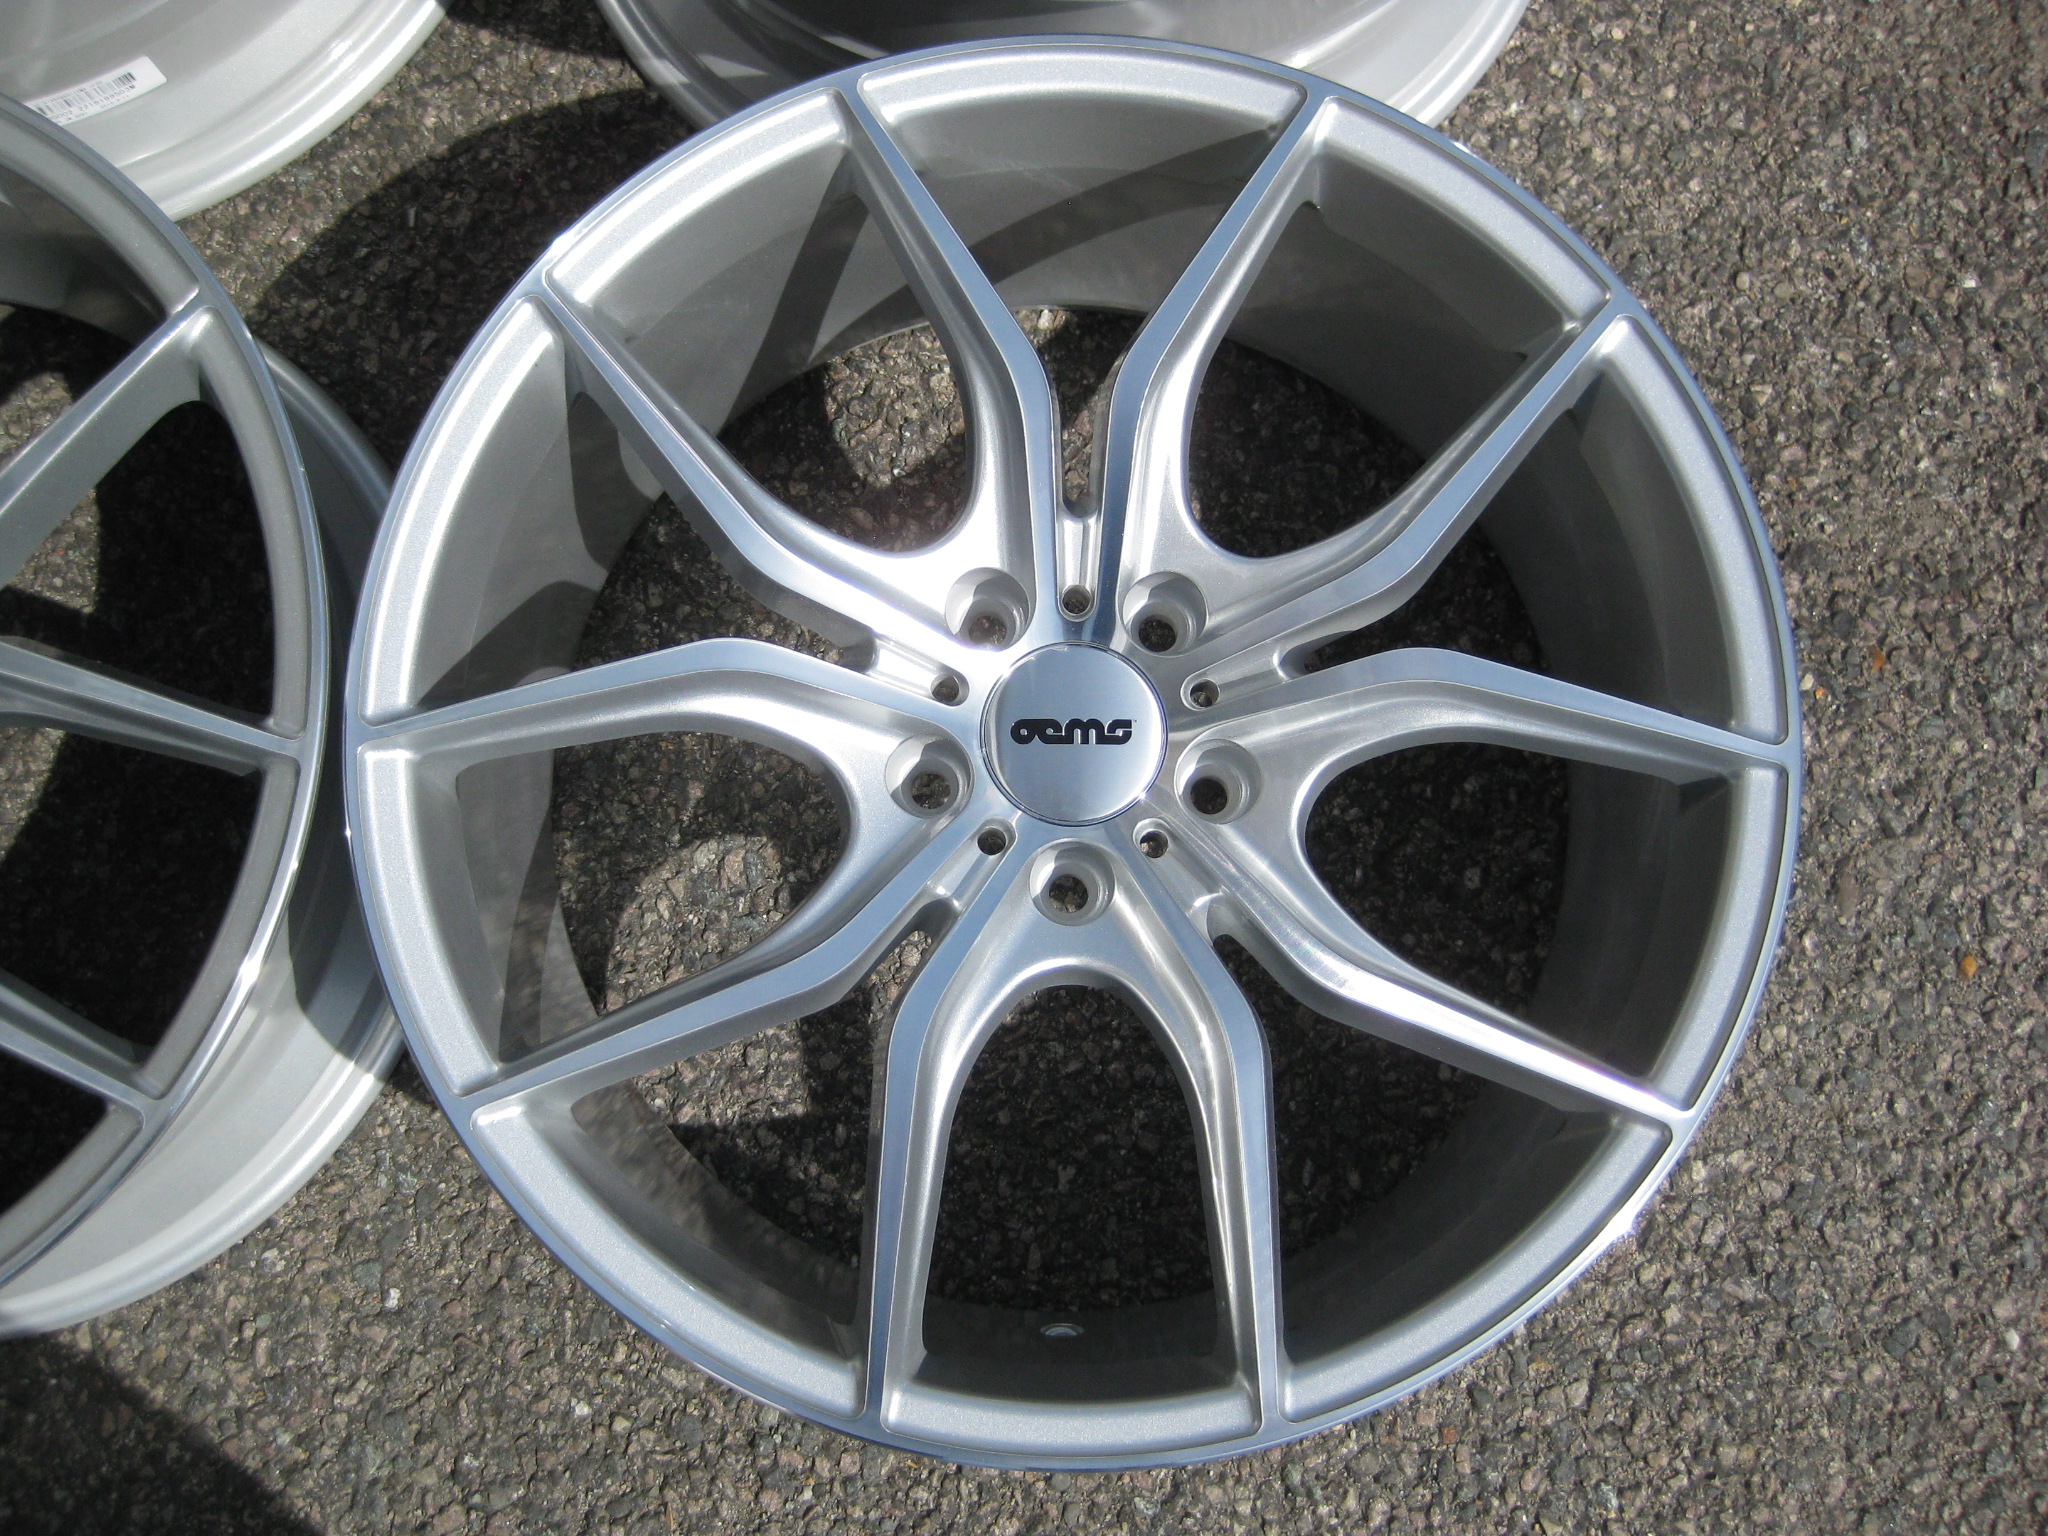 NEW 19  OEMS FS17 CONCAVED ALLOY WHEELS IN SILVER WITH POLISHED FACE  WIDER 9 5  REAR